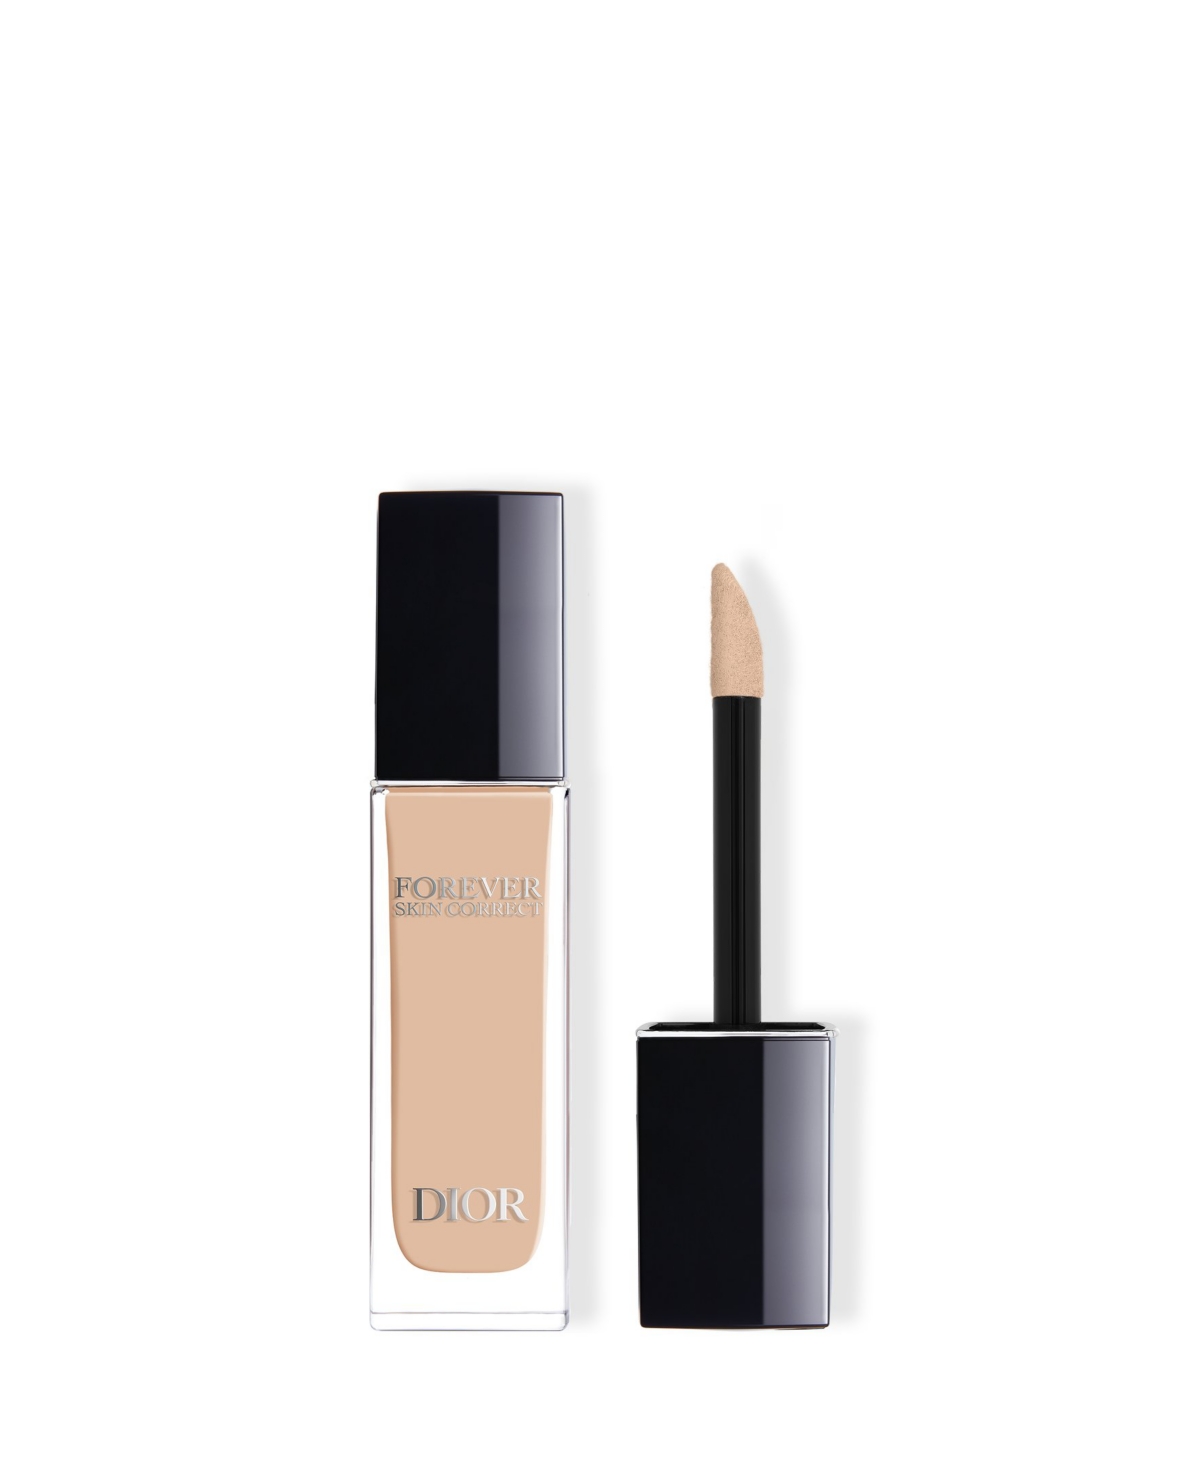 Dior Forever Skin Correct Full-coverage Concealer In N Neutral (light Skin With Neutral Beige